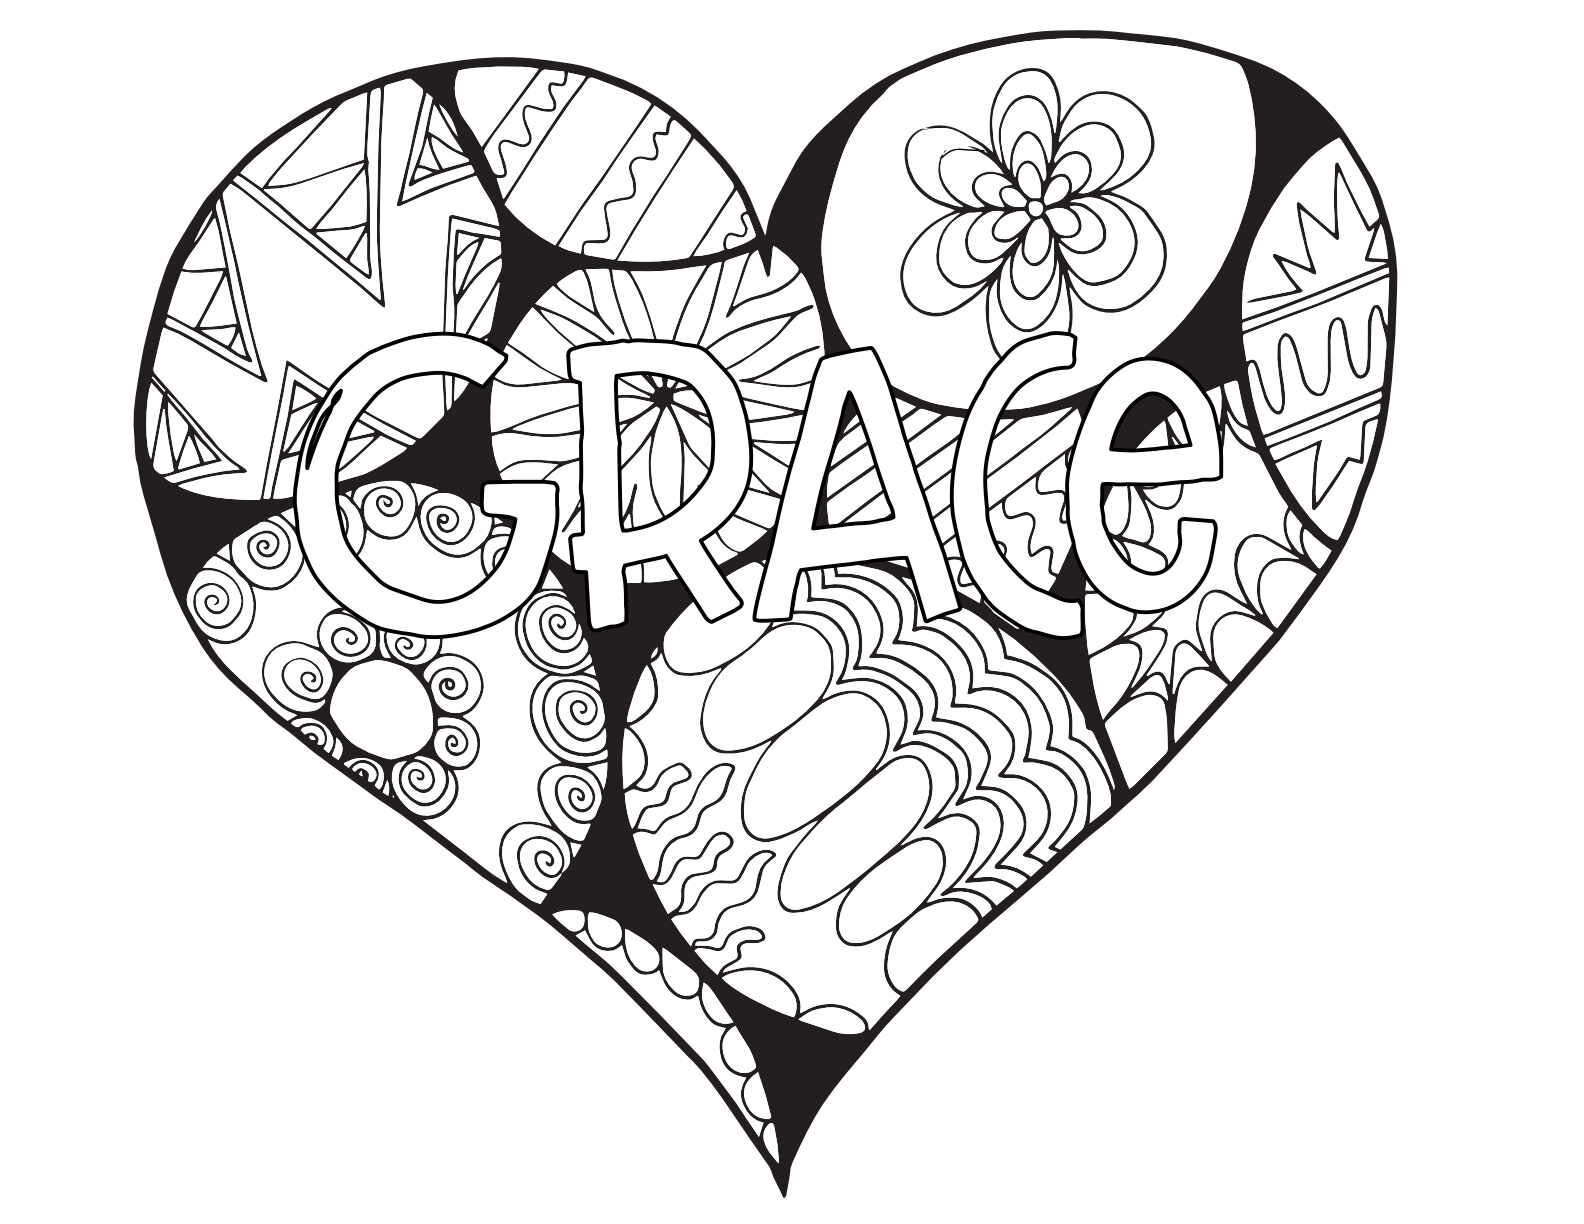 Coloring Page Of Grace American Girl With Bon Bon - Coloring Pages